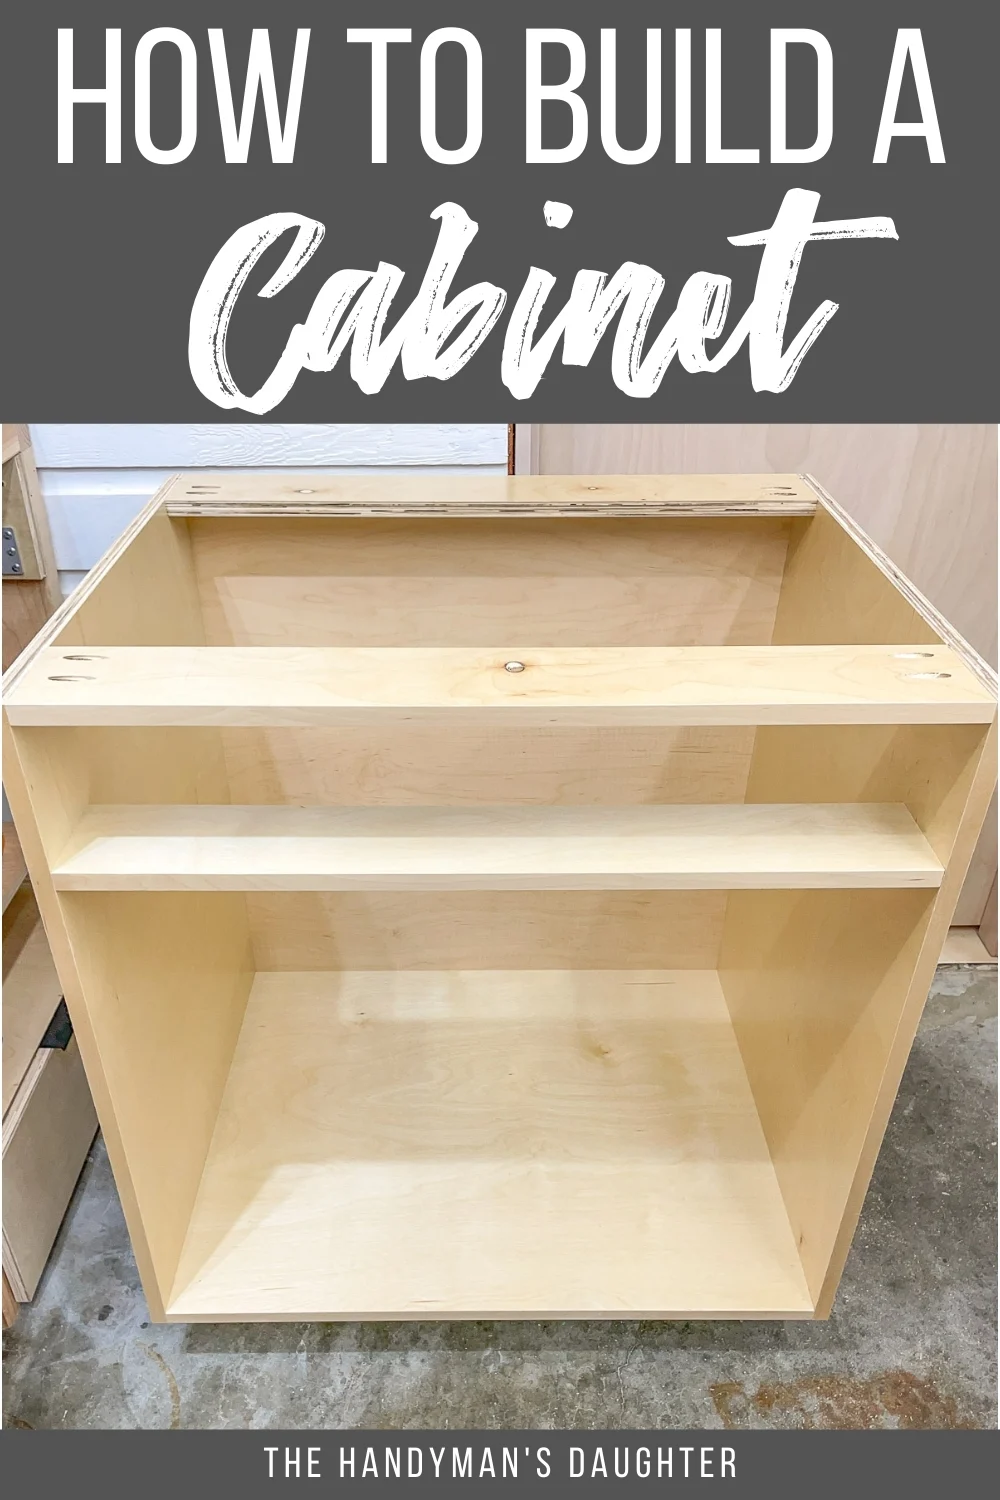 https://www.thehandymansdaughter.com/wp-content/uploads/2021/09/How-to-build-a-Cabinet-Pin-1.jpg.webp